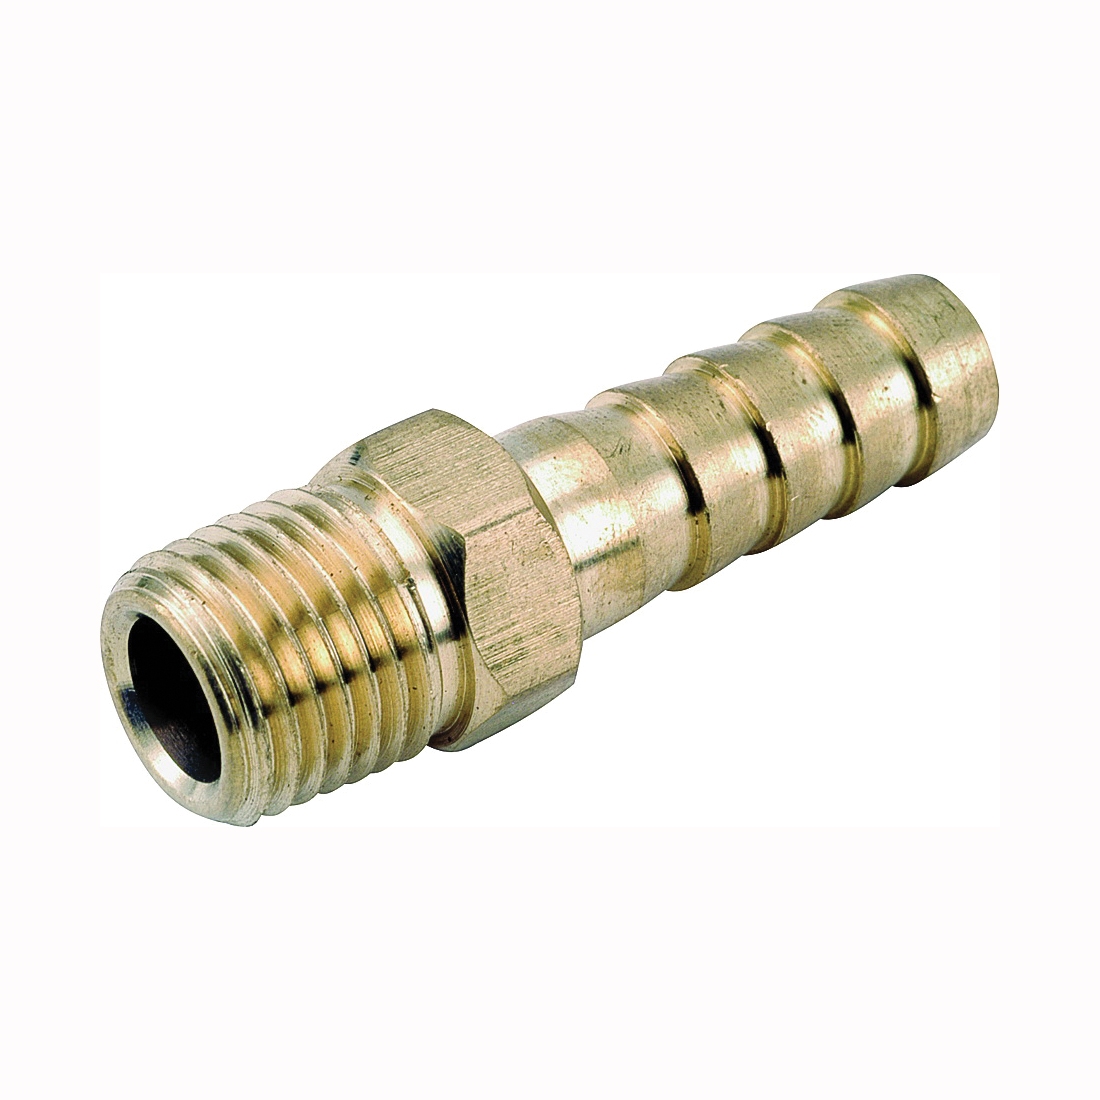 757001-0202 Hose Adapter, 1/8 in, Barb x MPT, Brass